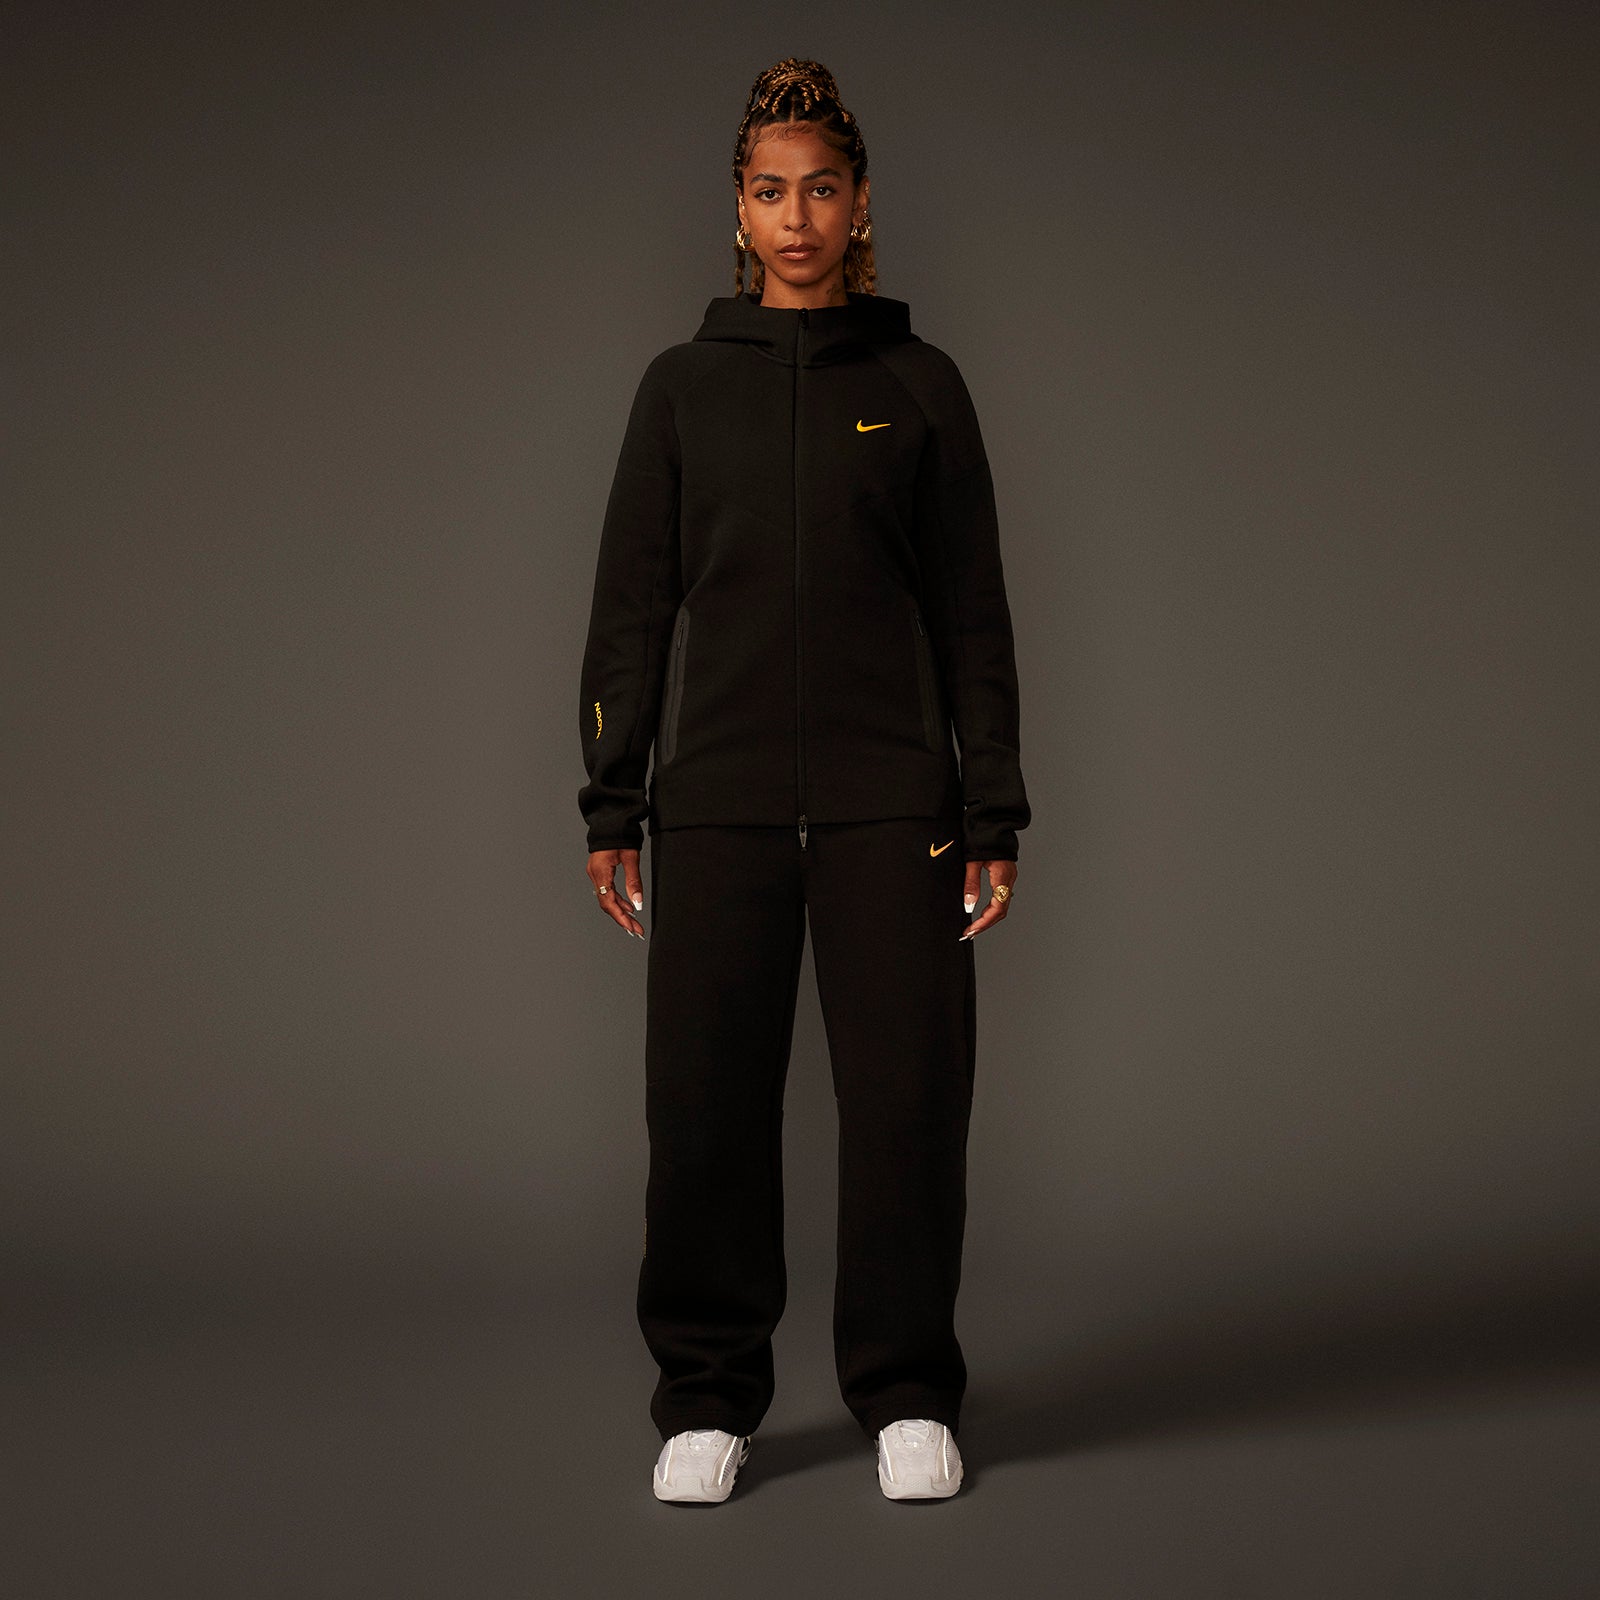 Nike x Drake Nocta Woven Track Jacket black for man - Sweatshirts   Holypopstore - Retail innovators to fuel the culture of sneakers